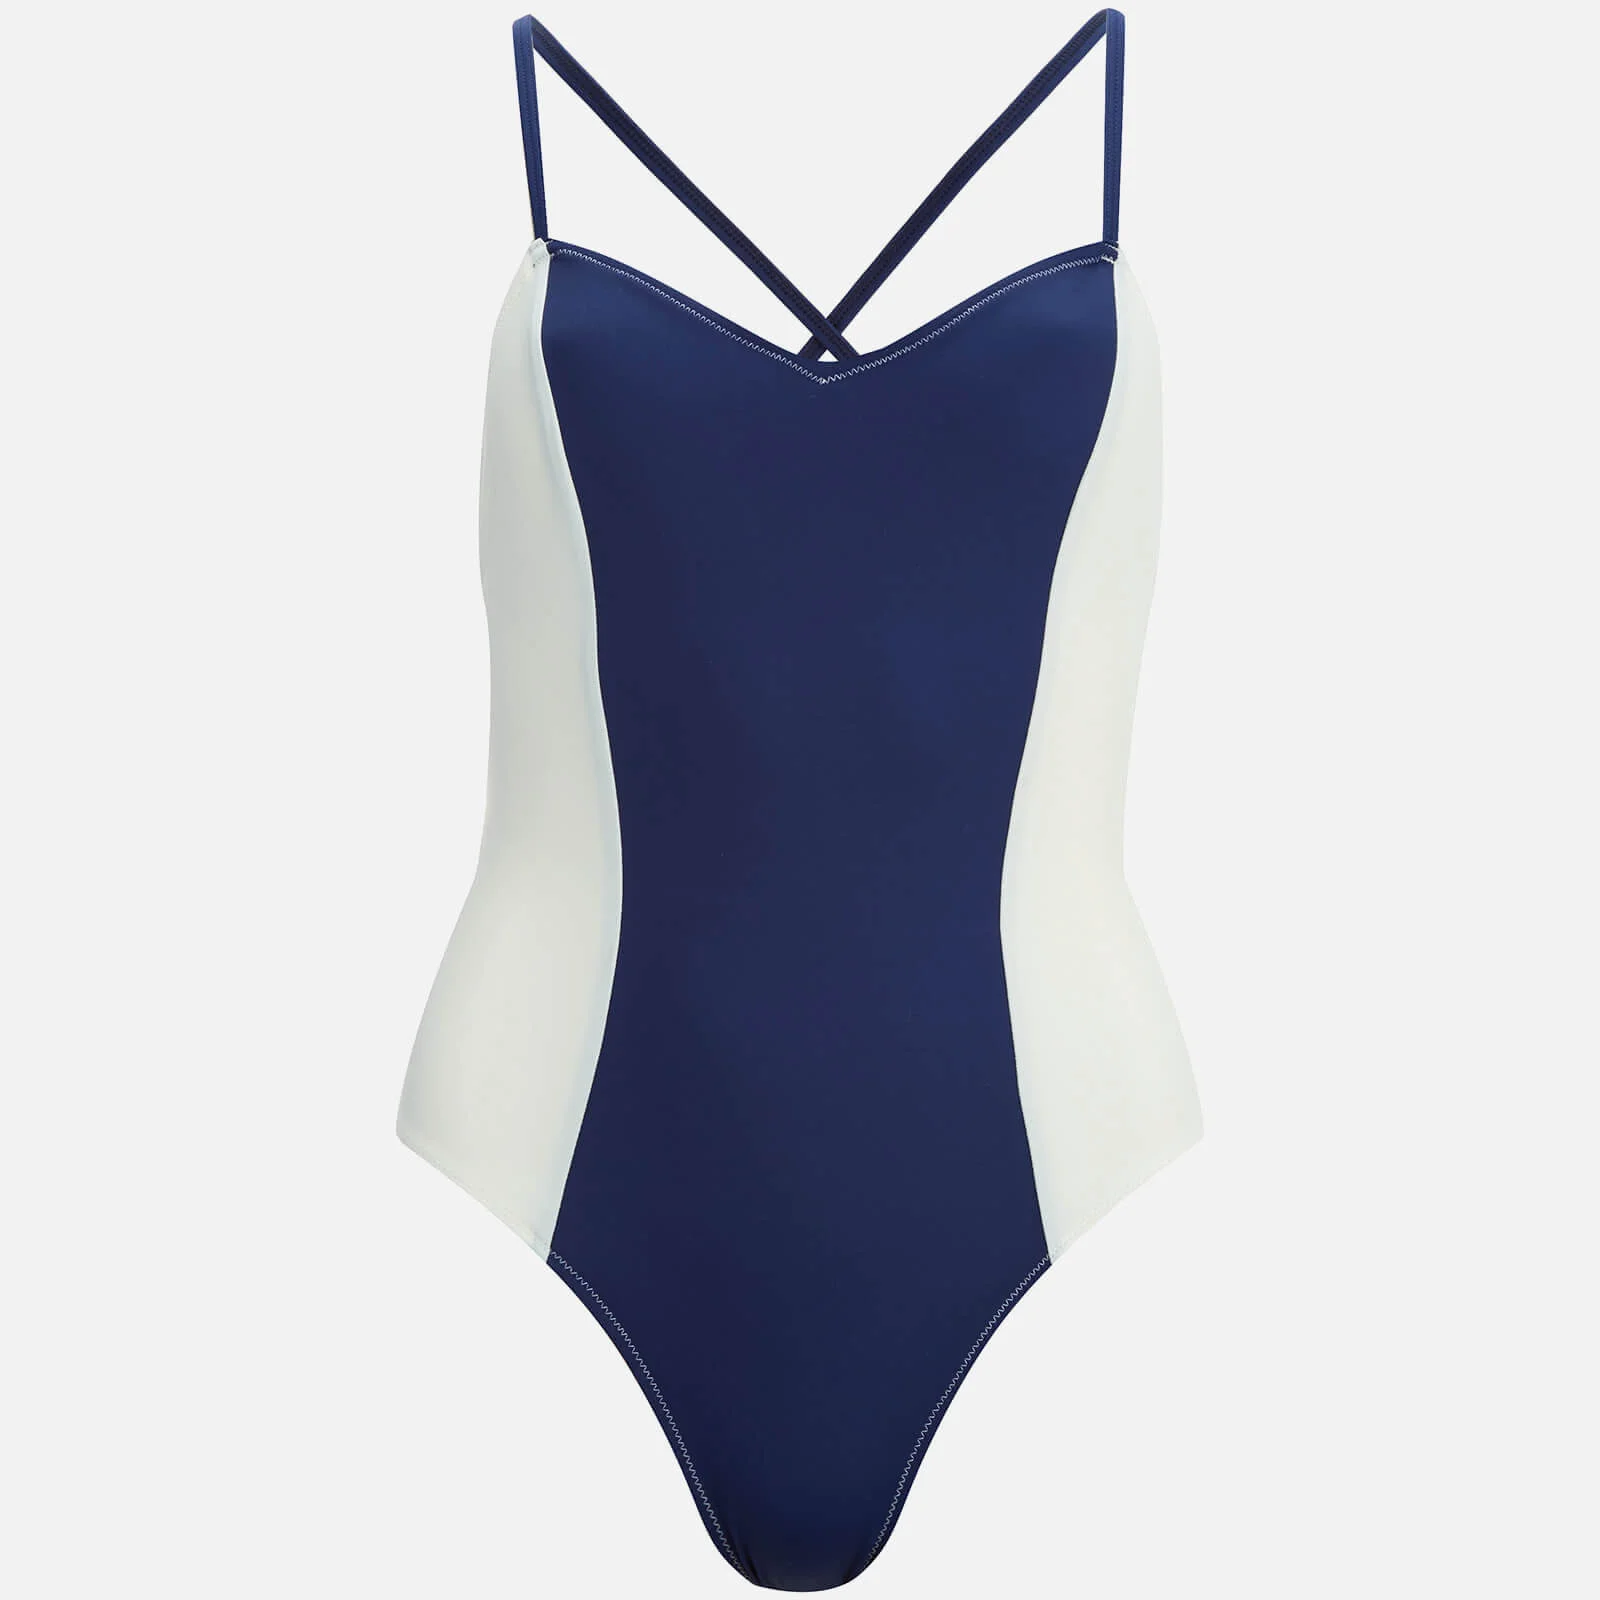 Solid & Striped Women's The Diana Swimsuit - Navy/Cream Image 1